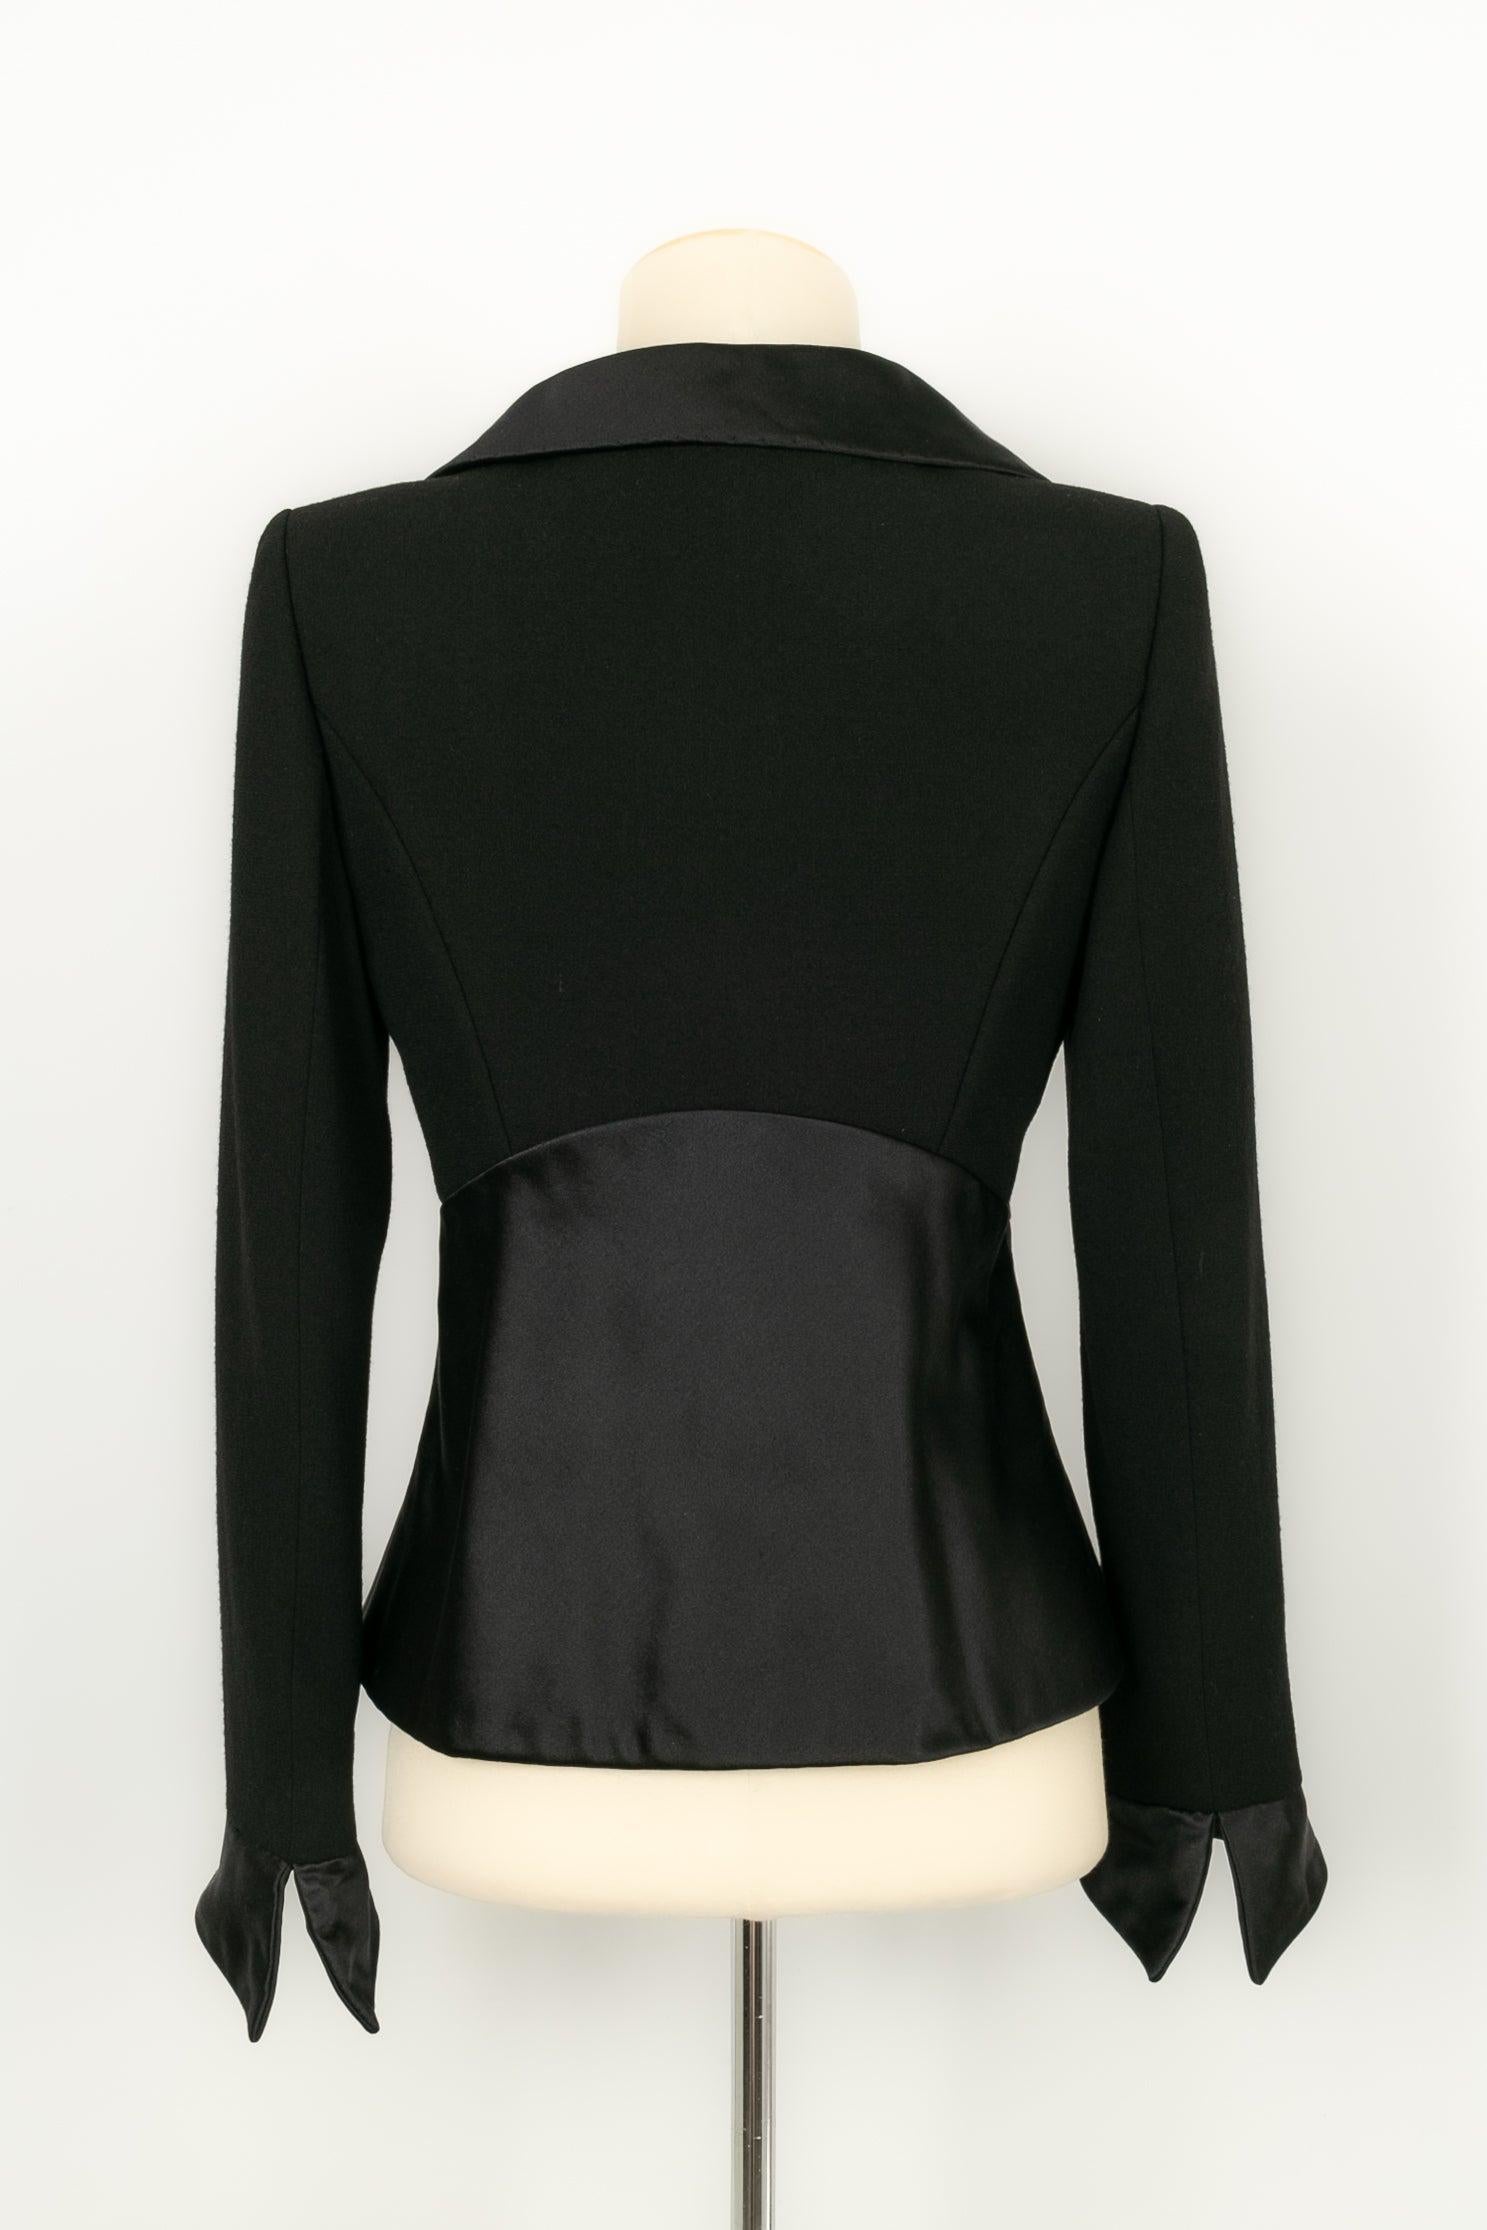 Women's Christian Lacroix Haute Couture Set Composed of Black Jacket and Brooch For Sale